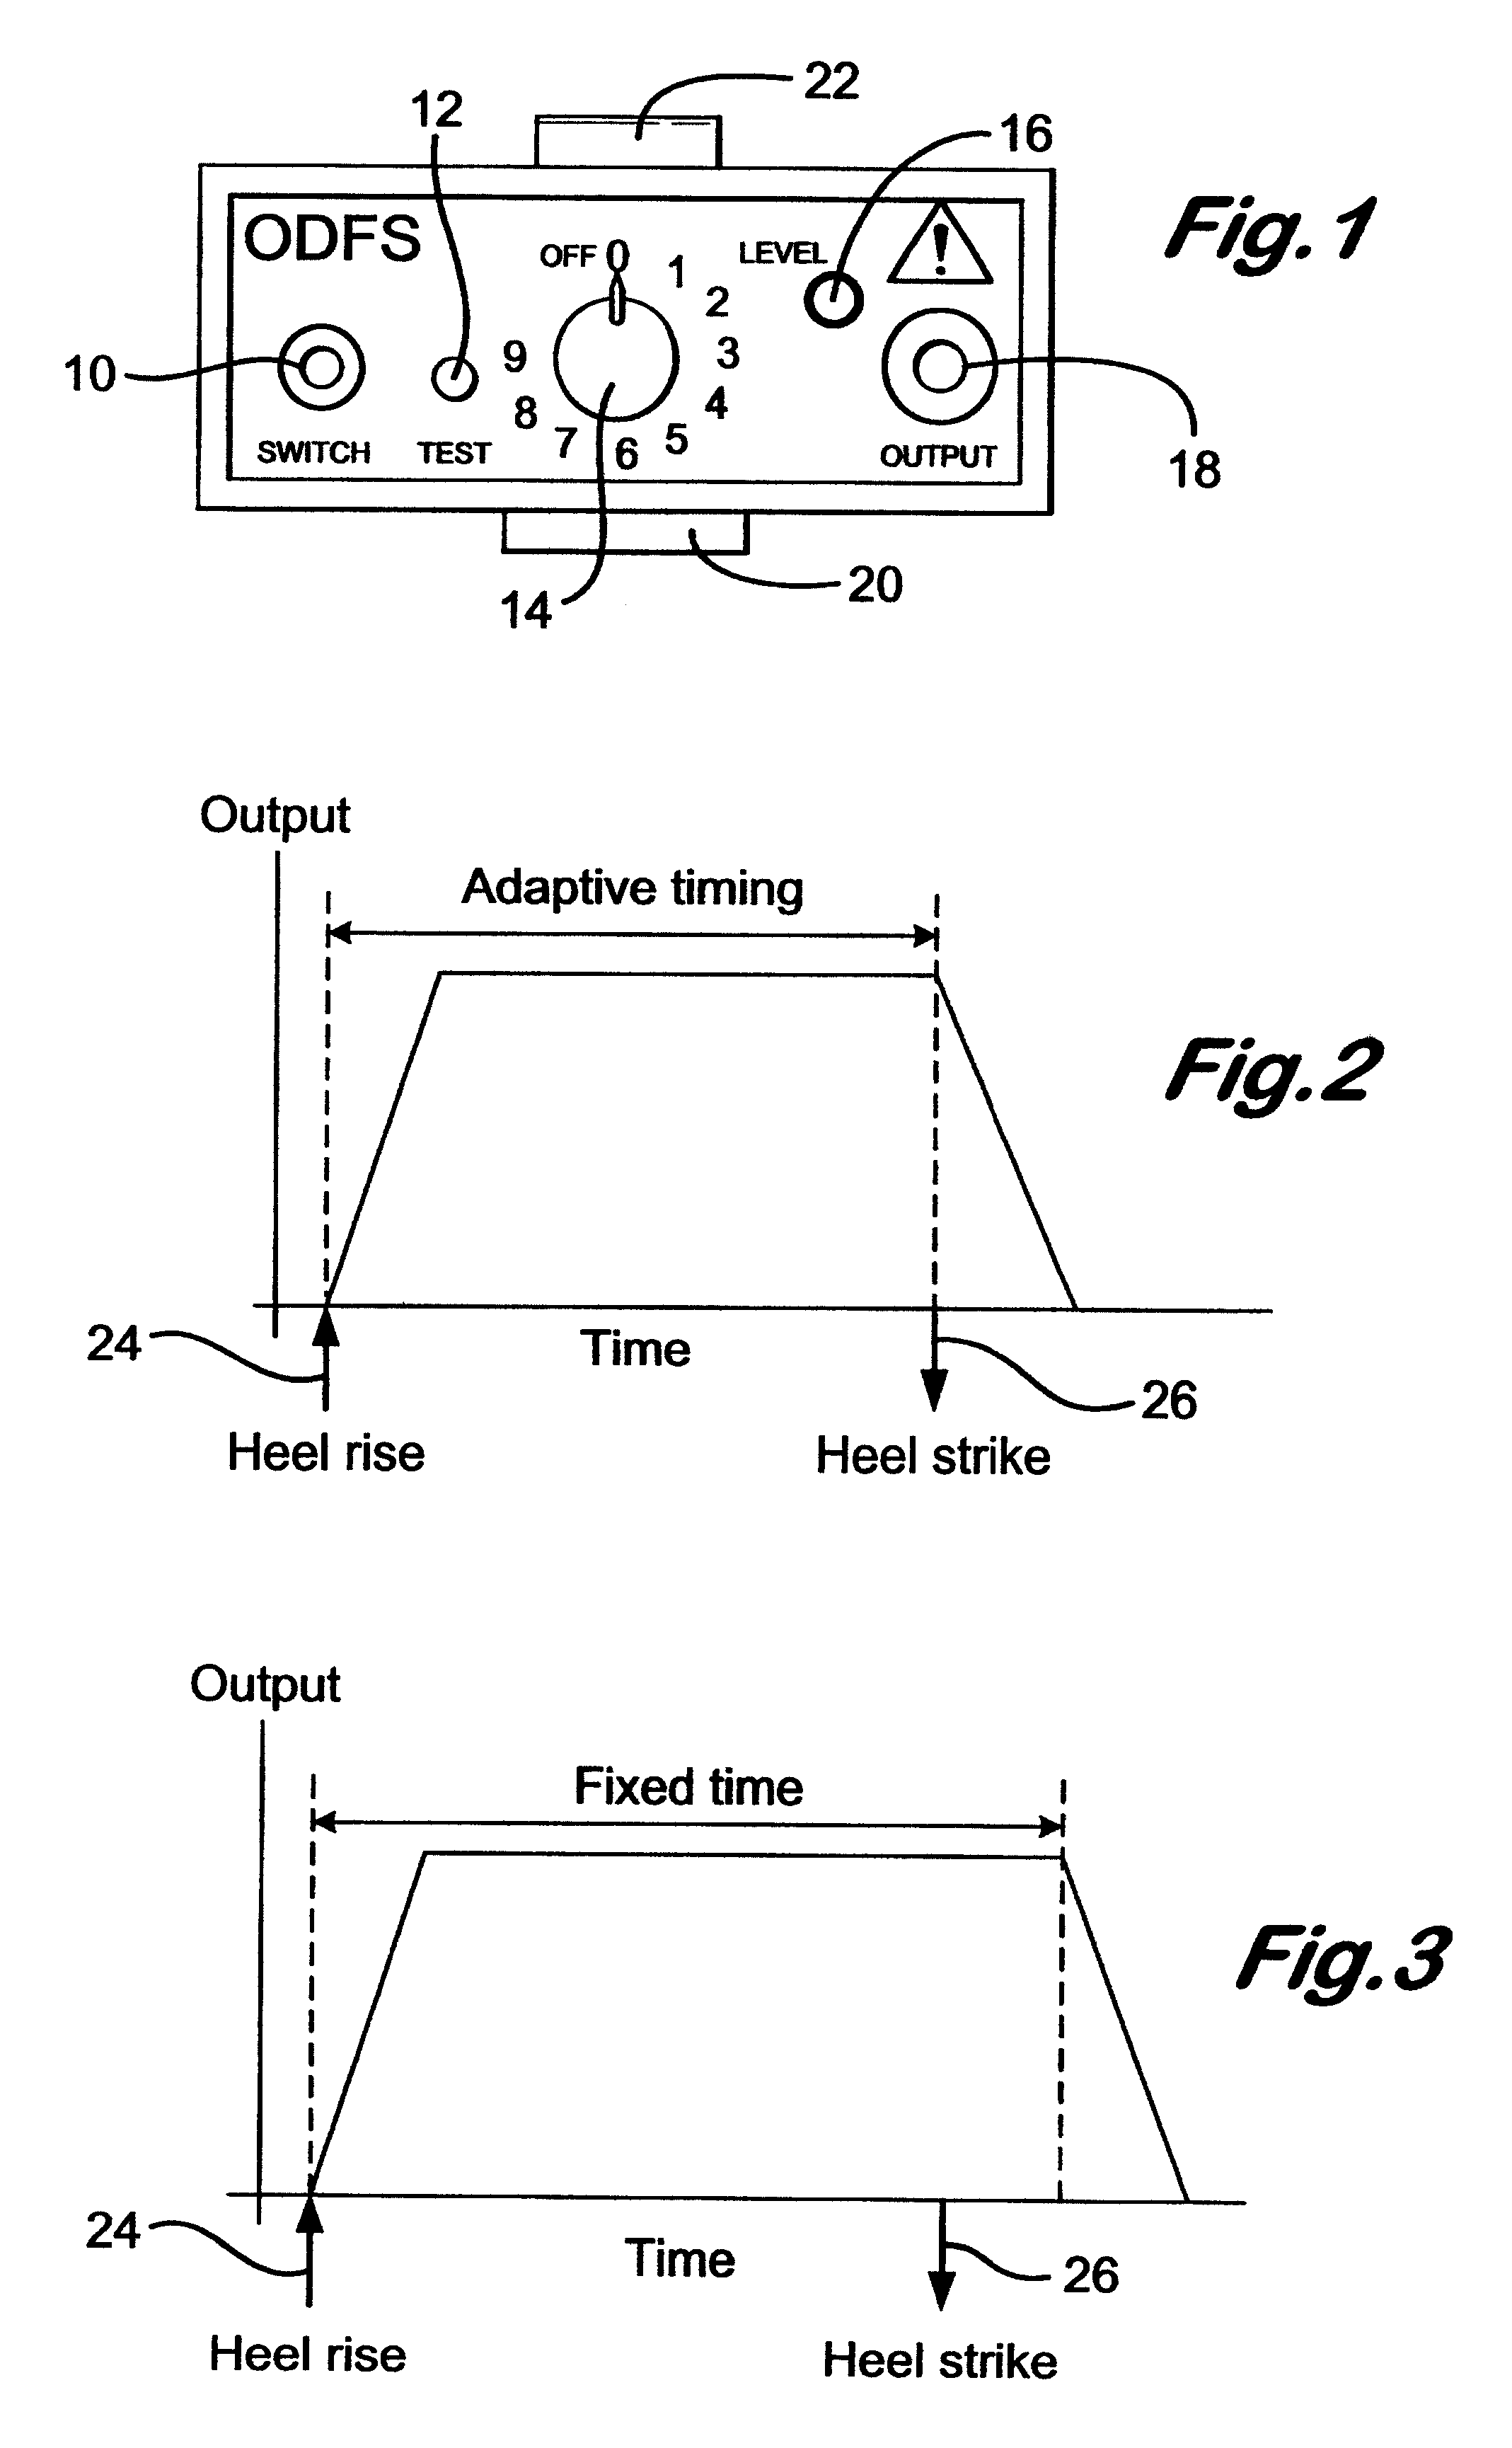 Apparatus for electrical stimulation of the body